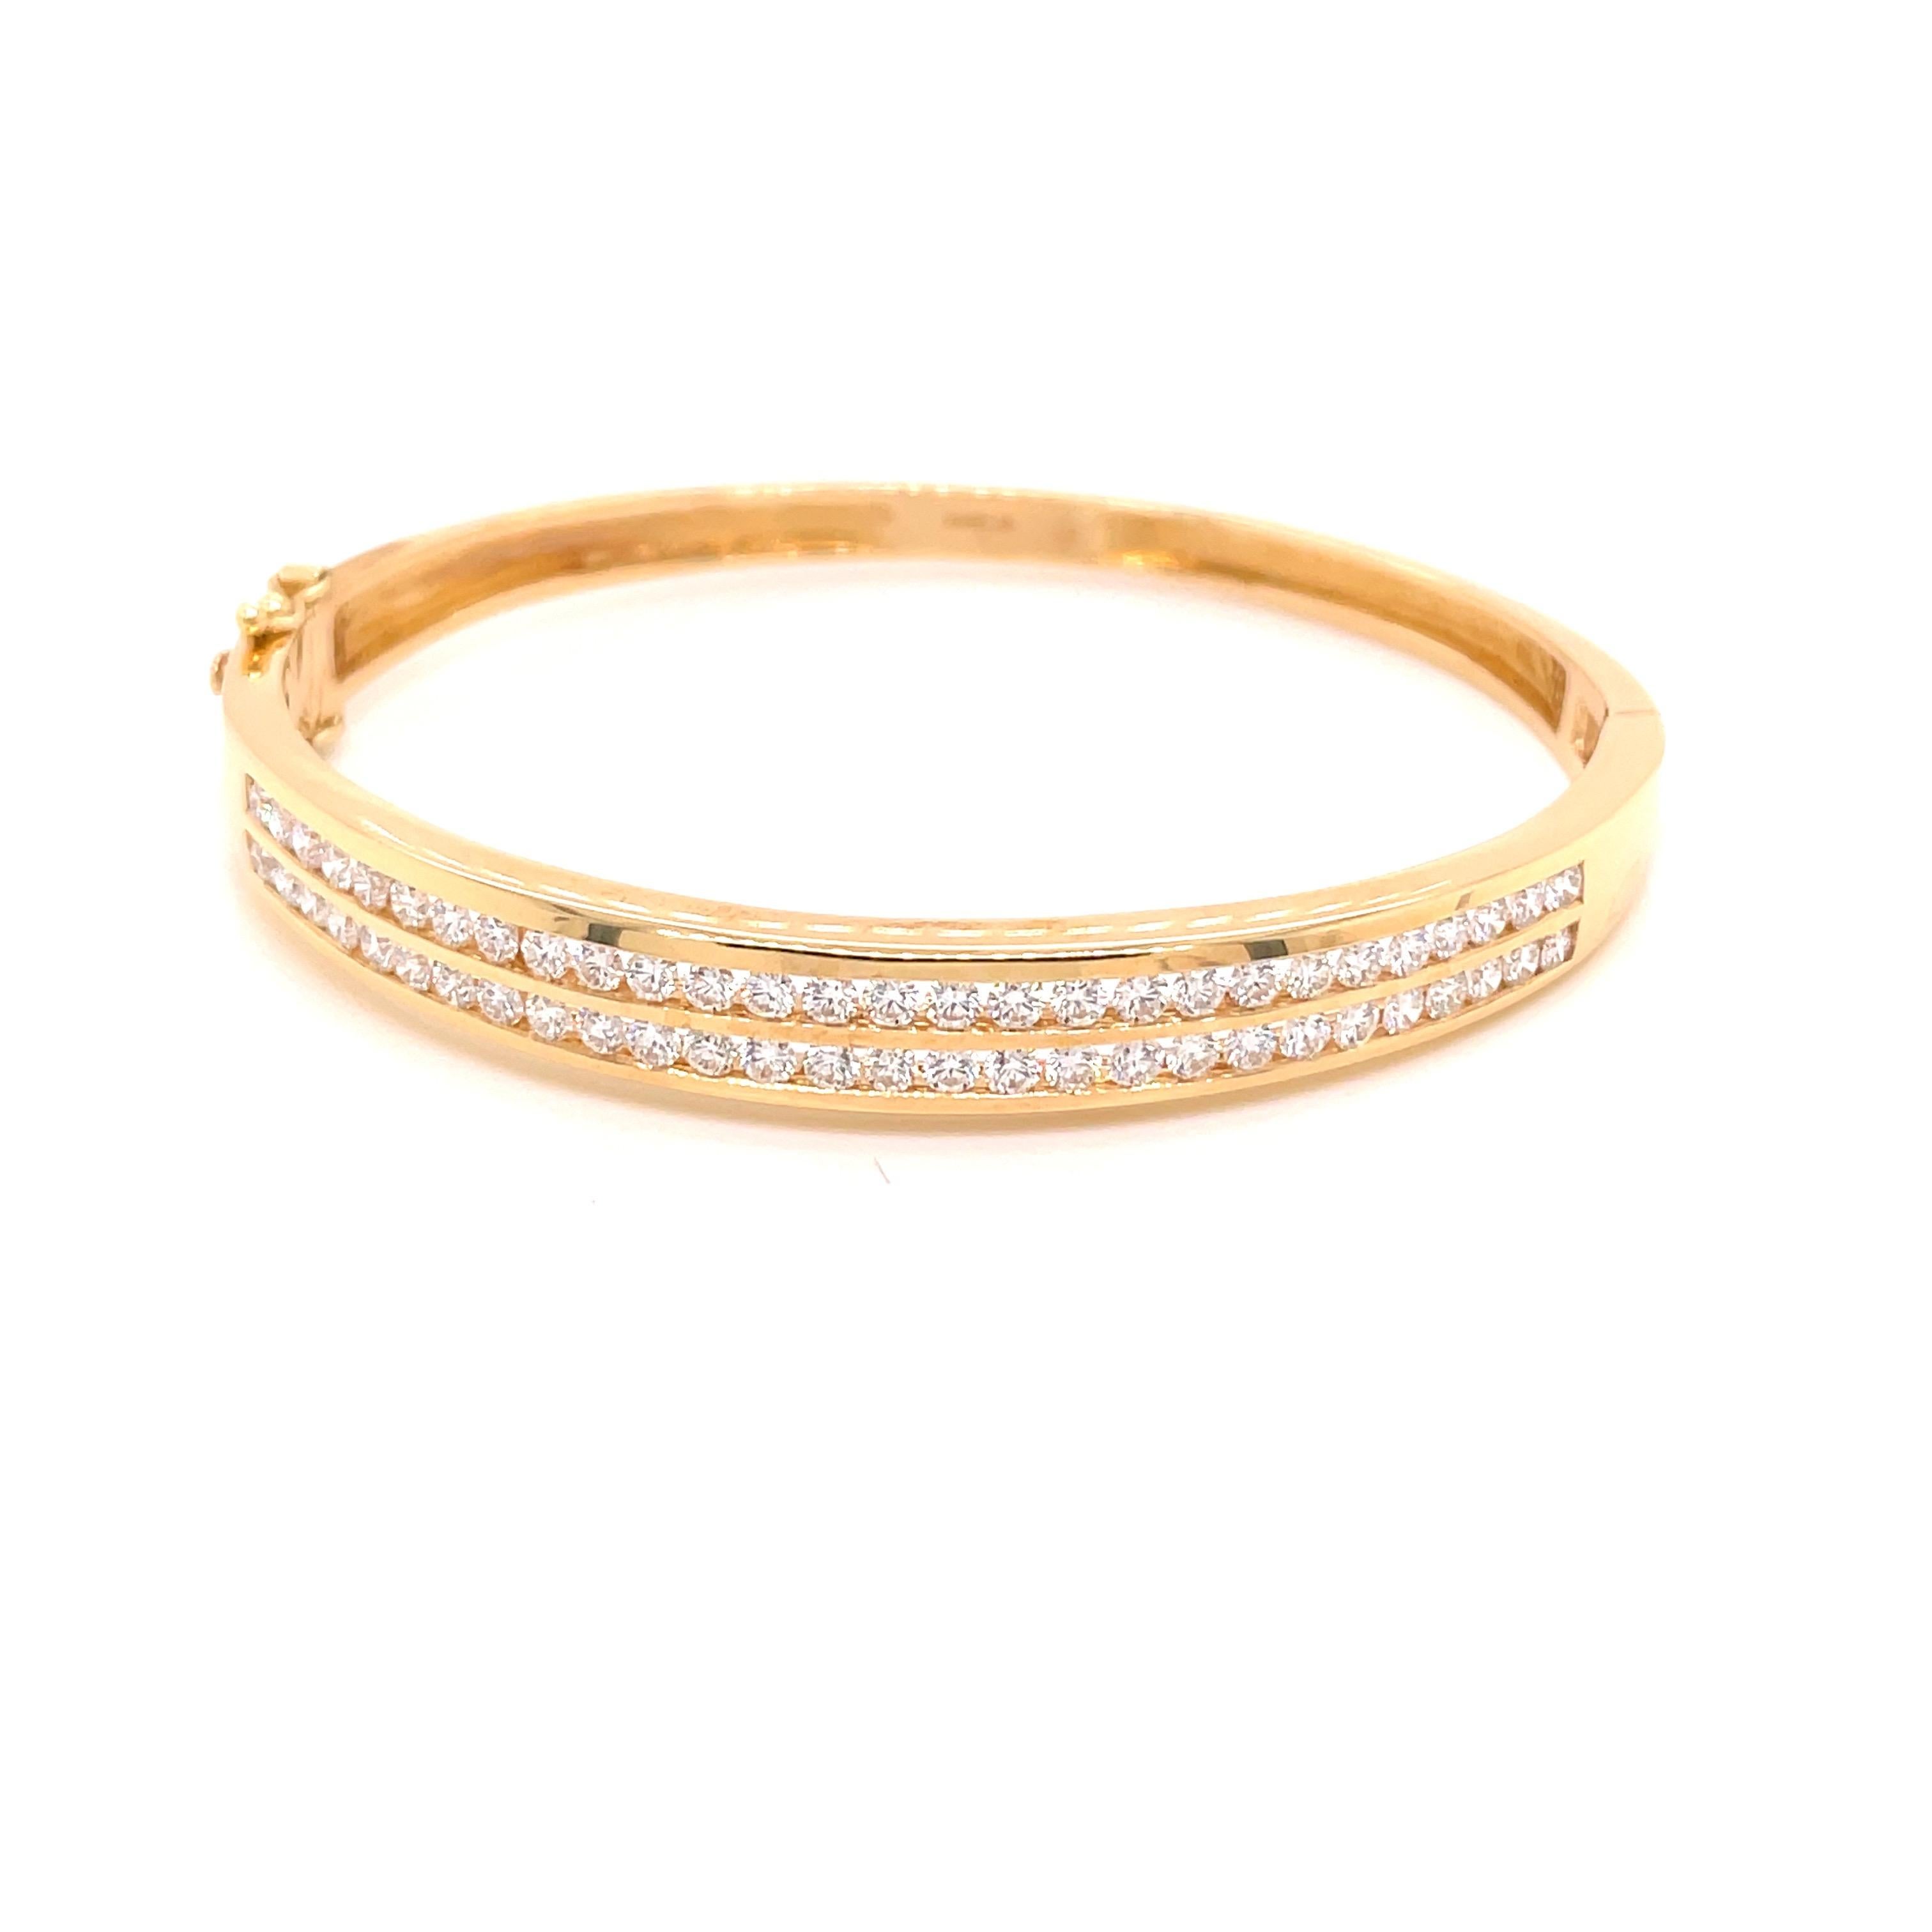 14K Yellow Gold Double Row Channel Diamond Bangle Bracelet 2.04ct - The bangle is set with 56 round brilliant diamonds weighing 2.04ct with G - H color and VS2 clarity. The width of the bangle on top is 7mm and tapers to 4mm on the bottom. The